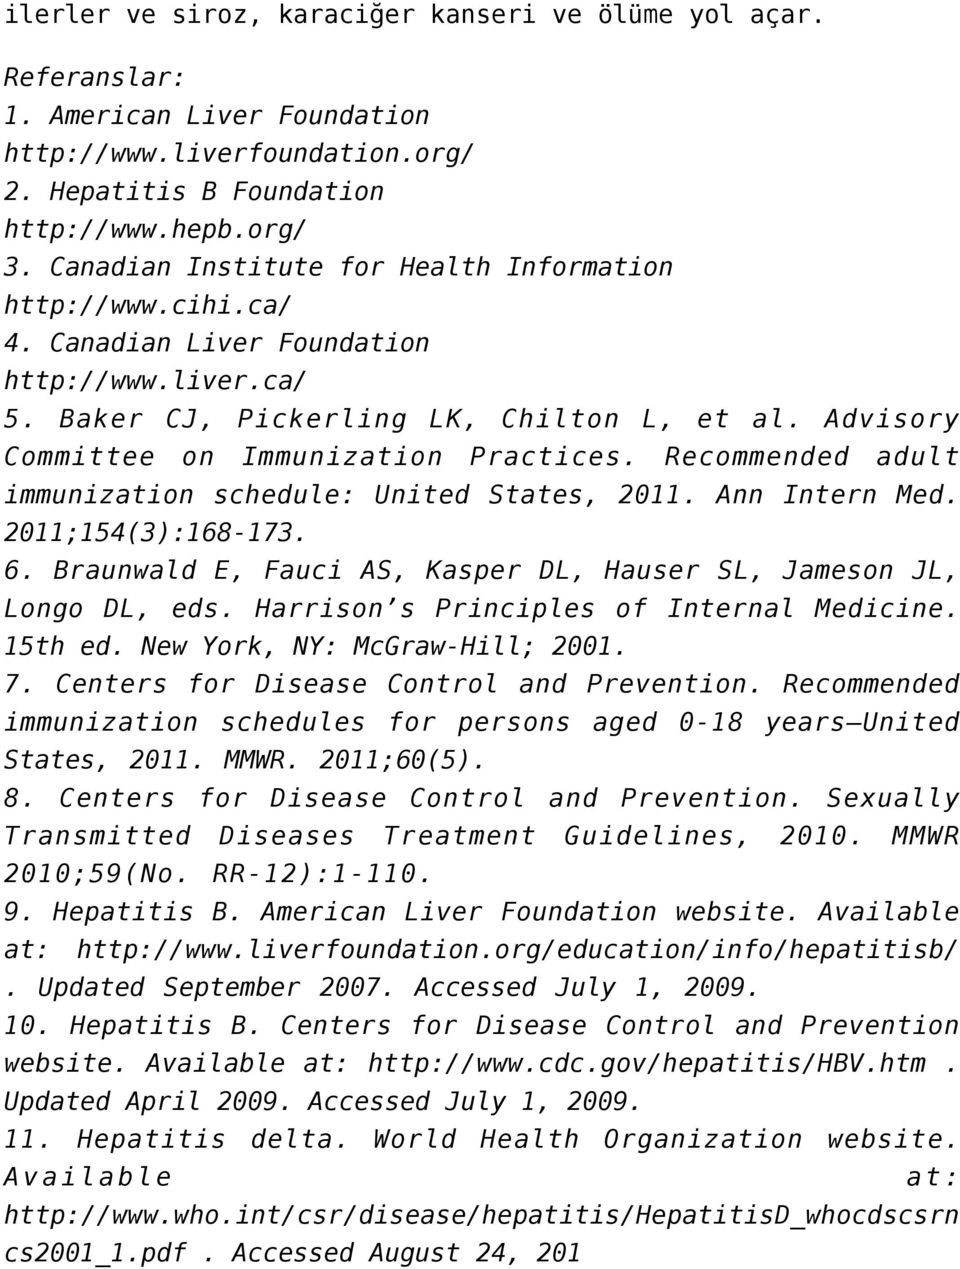 Advisory Committee on Immunization Practices. Recommended adult immunization schedule: United States, 2011. Ann Intern Med. 2011;154(3):168-173. 6.